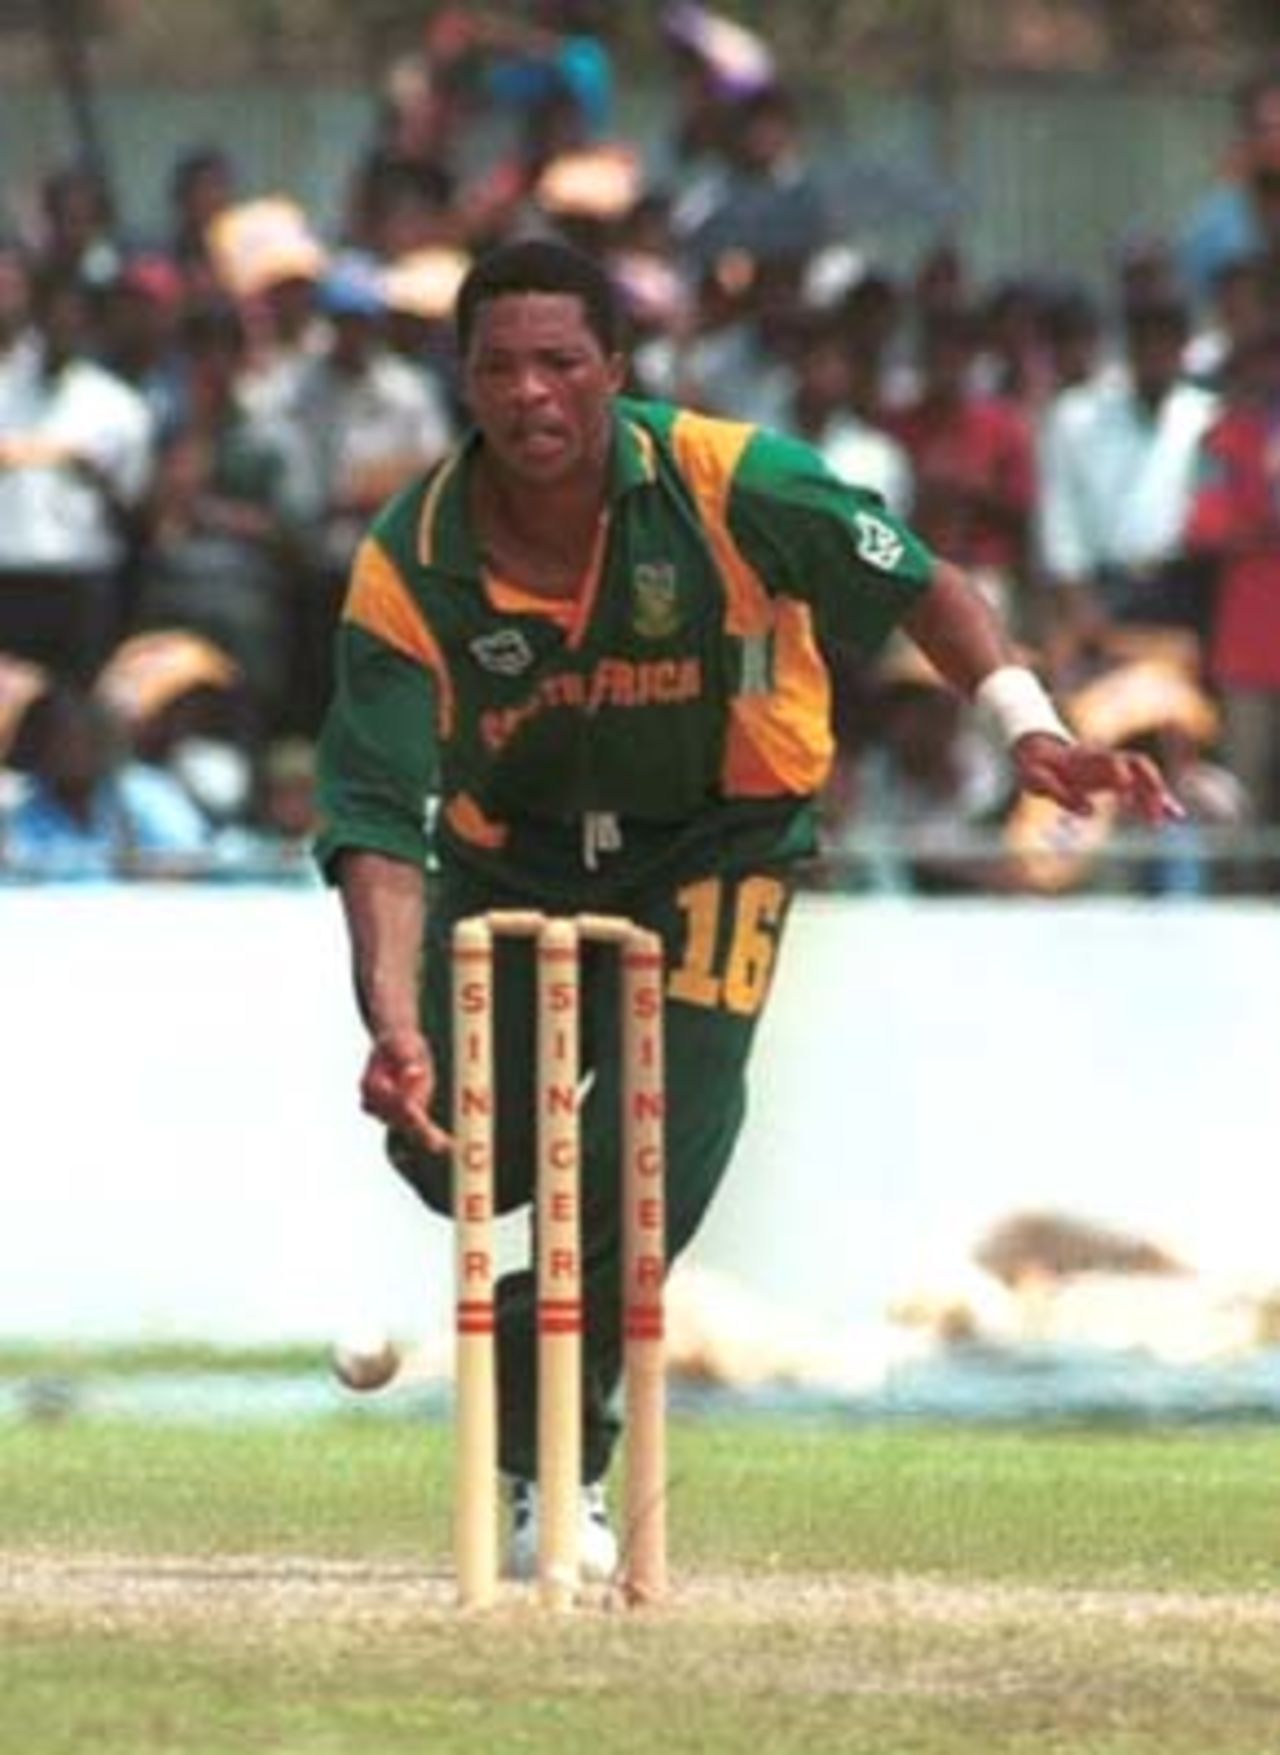 South African bowler Makhaya Ntini removes the bails to get a run out decision against Sri Lankan batsman Kumar Sangakkara,not in the picture, during the Singer Cup Triangular limited overs cricket match against Sri Lanka in Galle International stadium in Galle Sri Lanka on Thursday, July. 6, 2000